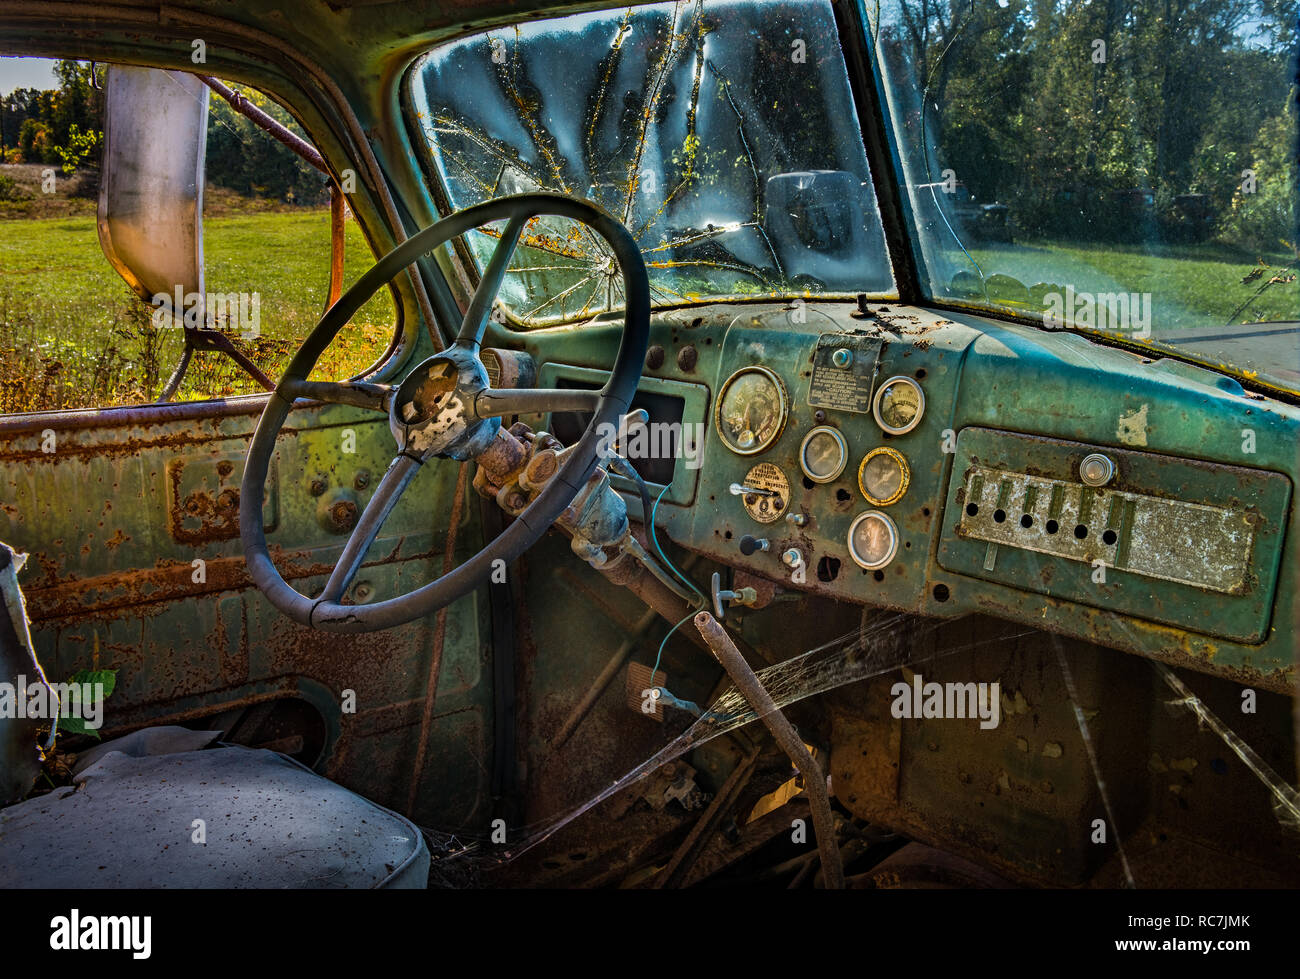 Interior Of Old Truck In The Truck Cemetery Near Columbia